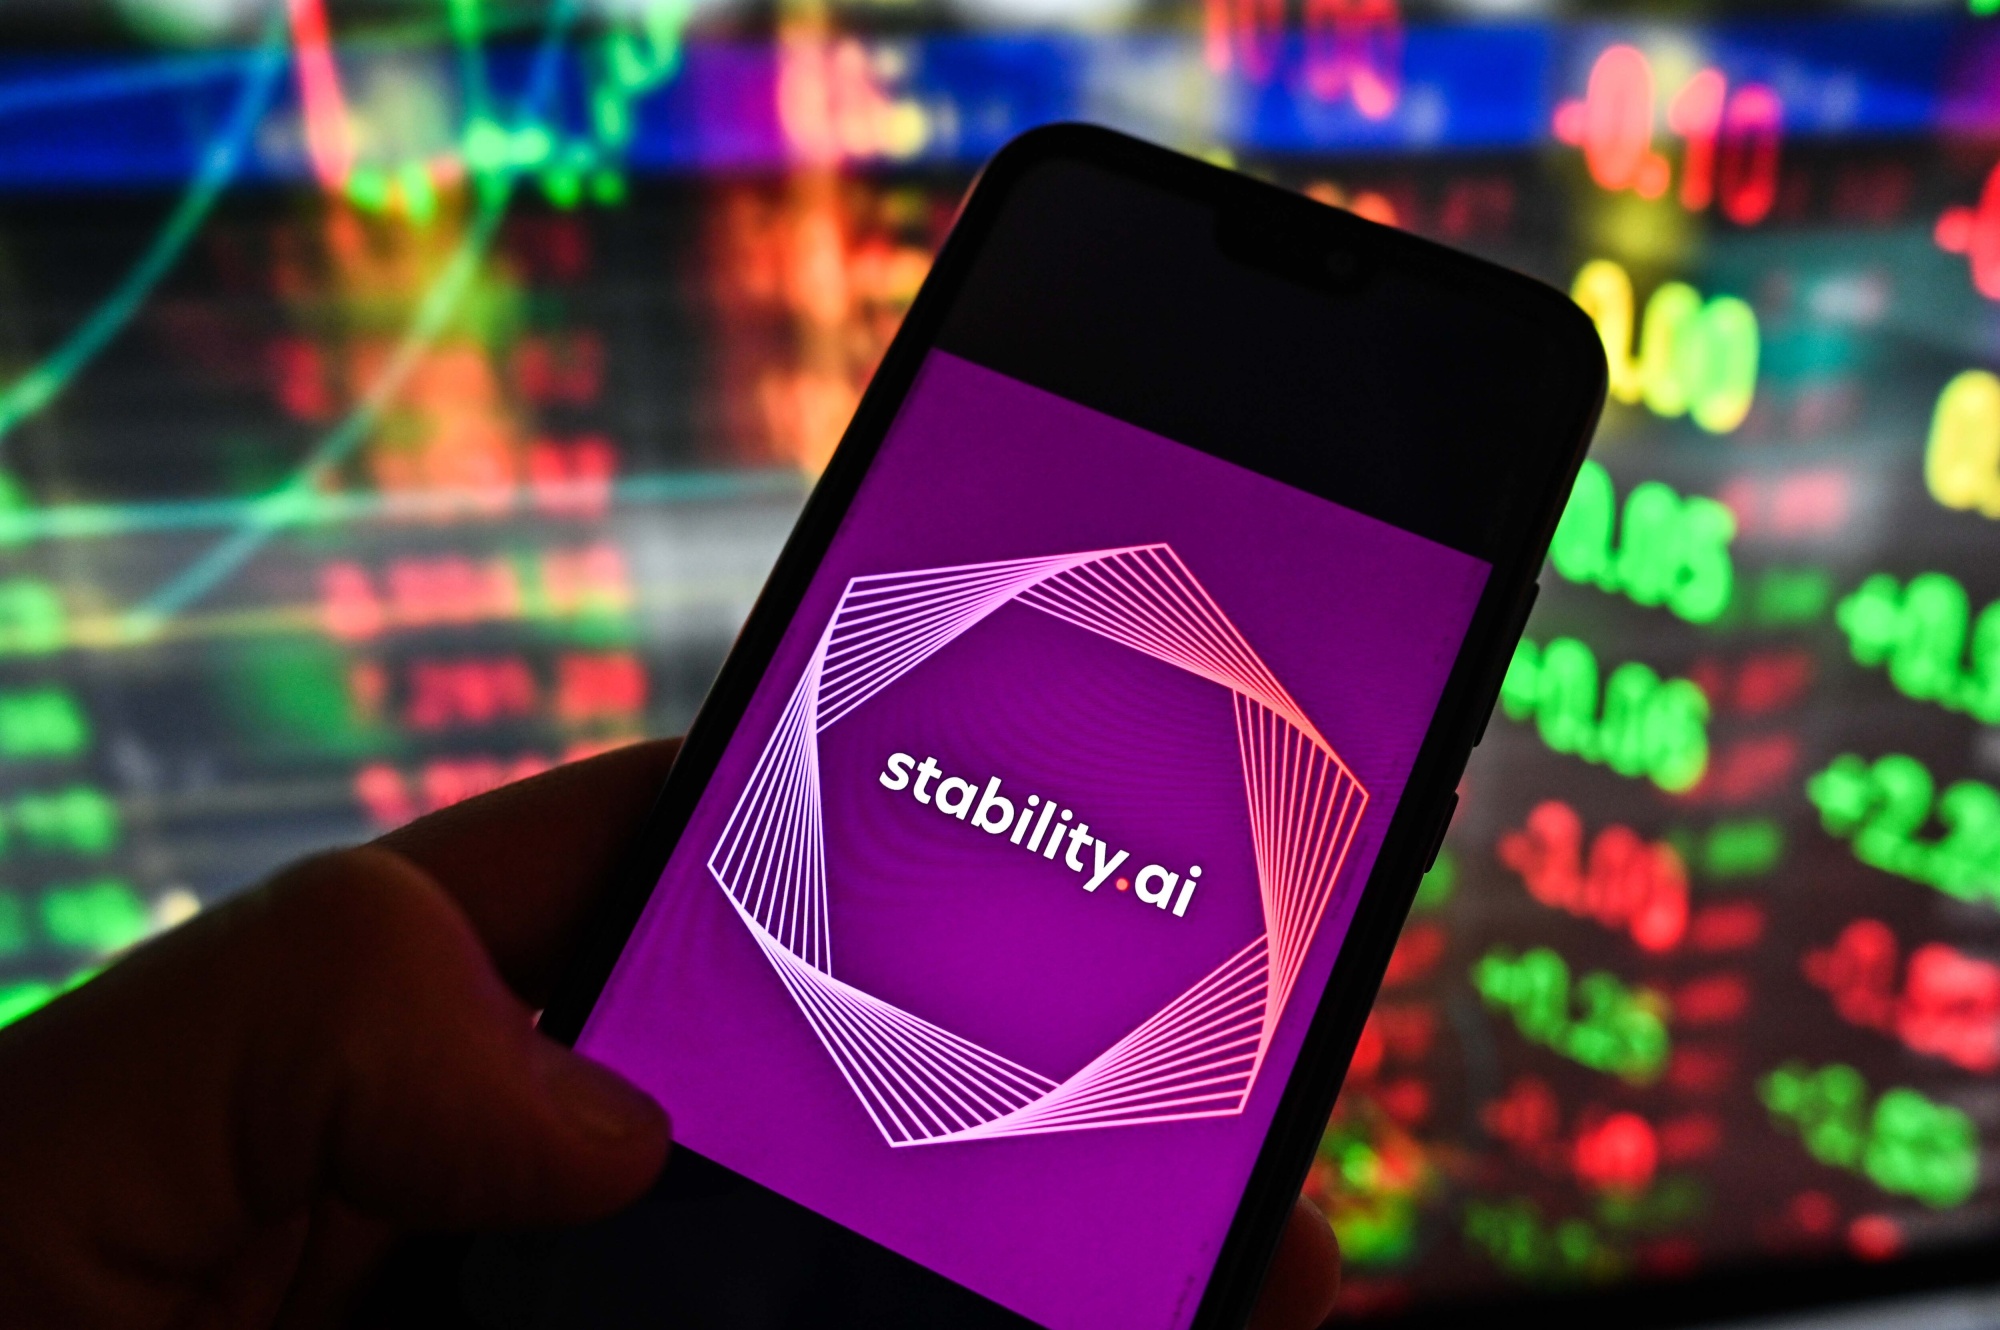 POLAND - 2023/01/20: In this photo illustration, the Stability.ai logo is displayed on a smartphone with stock market exchange in the background. (Photo Illustration by Omar Marques/SOPA Images/LightRocket via Getty Images)